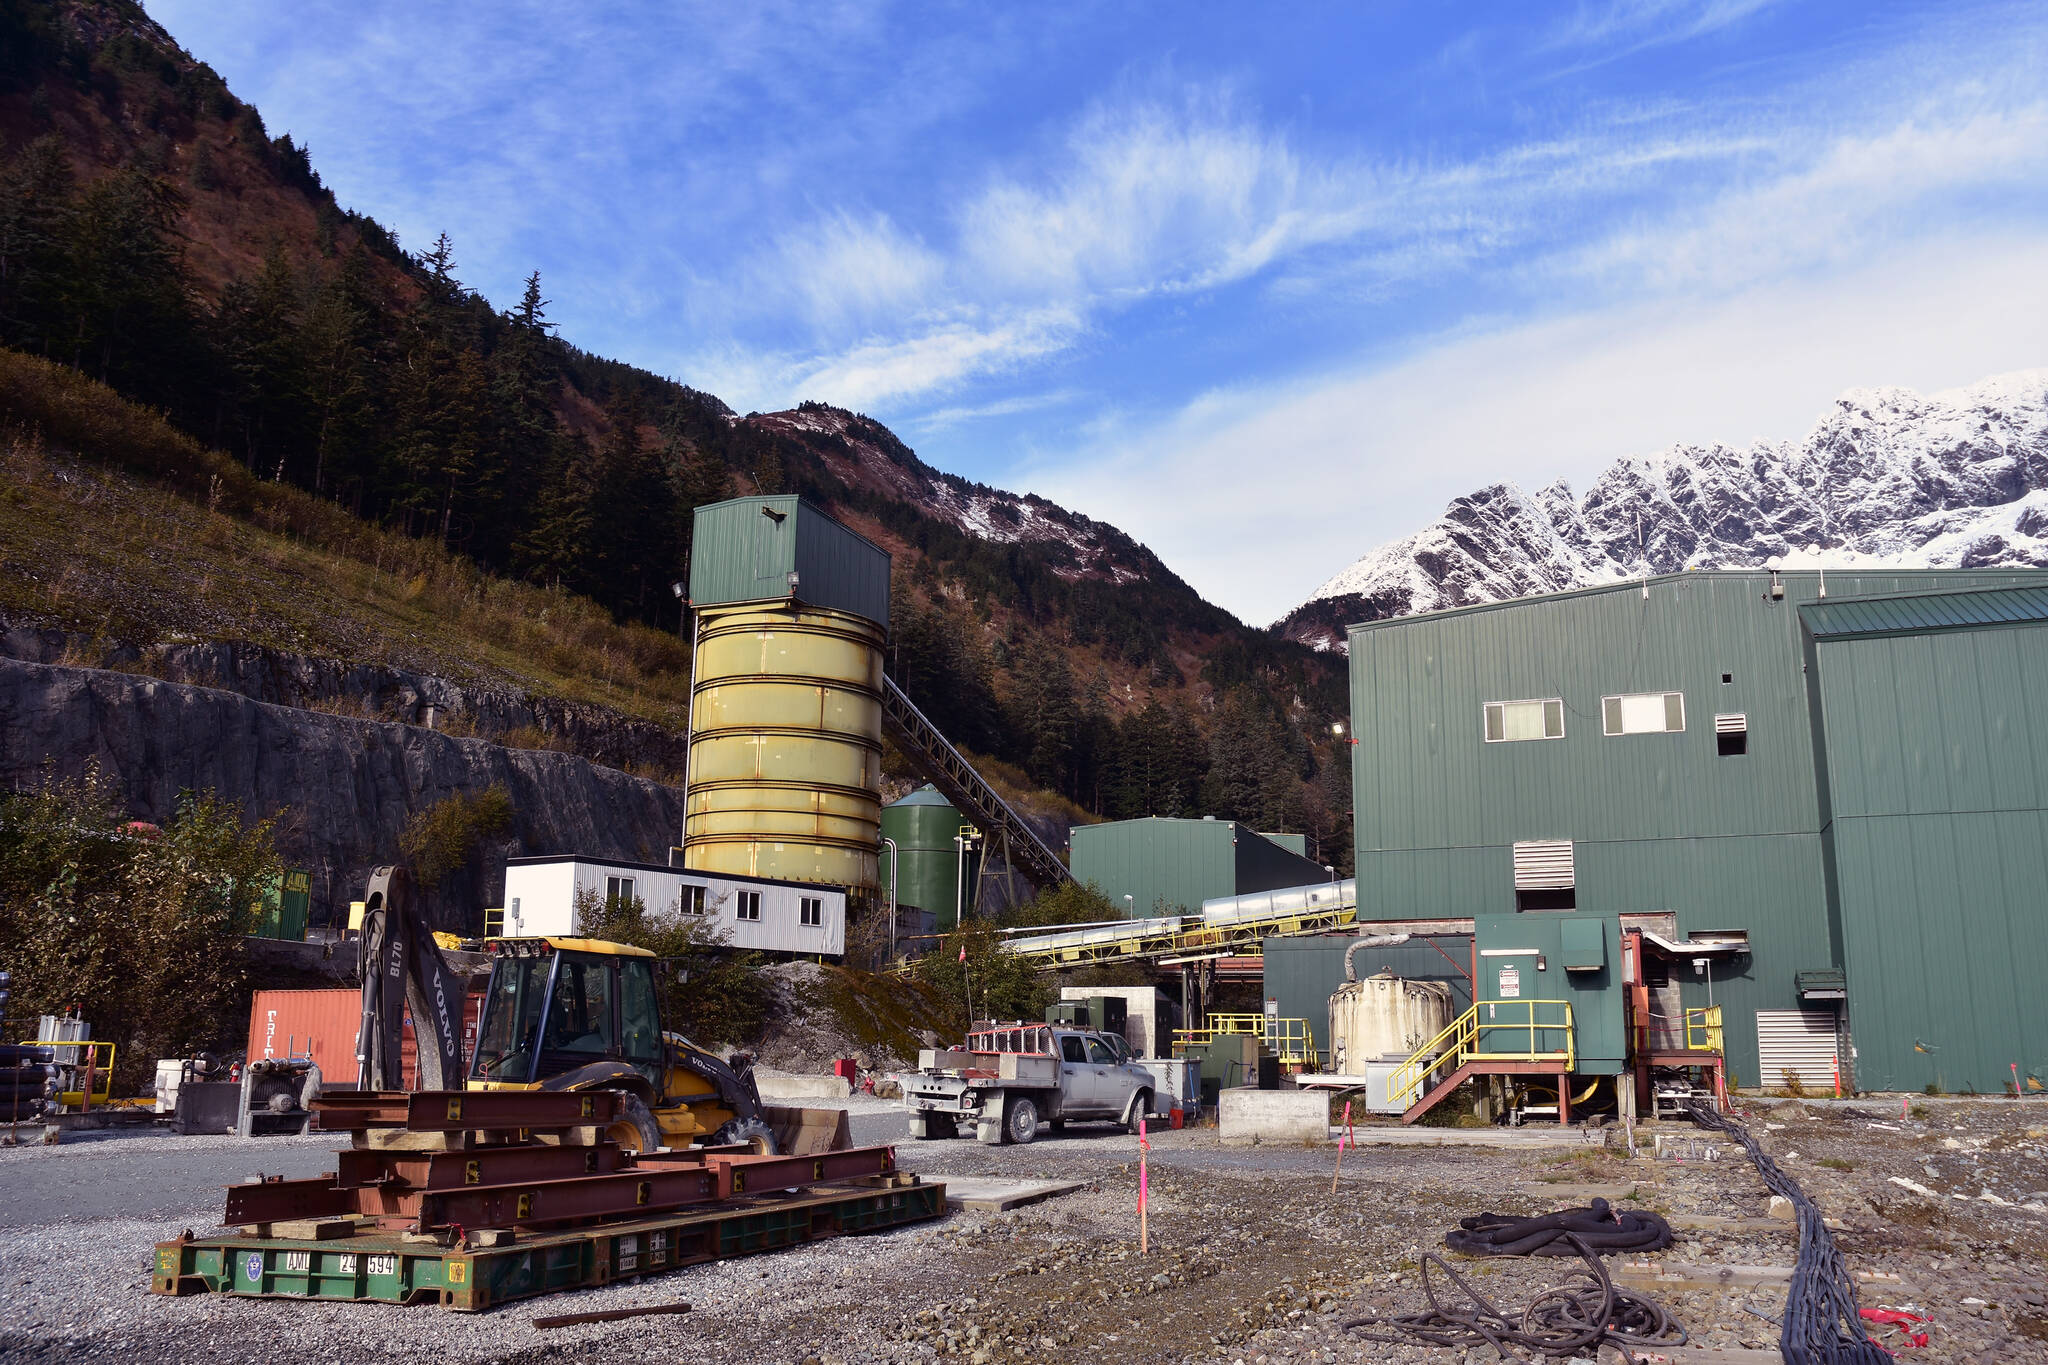 Peter Segall / Juneau Empire file
This file photo shows the mill facility at the Kensington Gold Mine on Oct. 14, 2019. A new study from the Institute of Social and Economic Research at the University of Alaska Anchorage tries to imagine what the state’s mining industry could look like in 20 years.